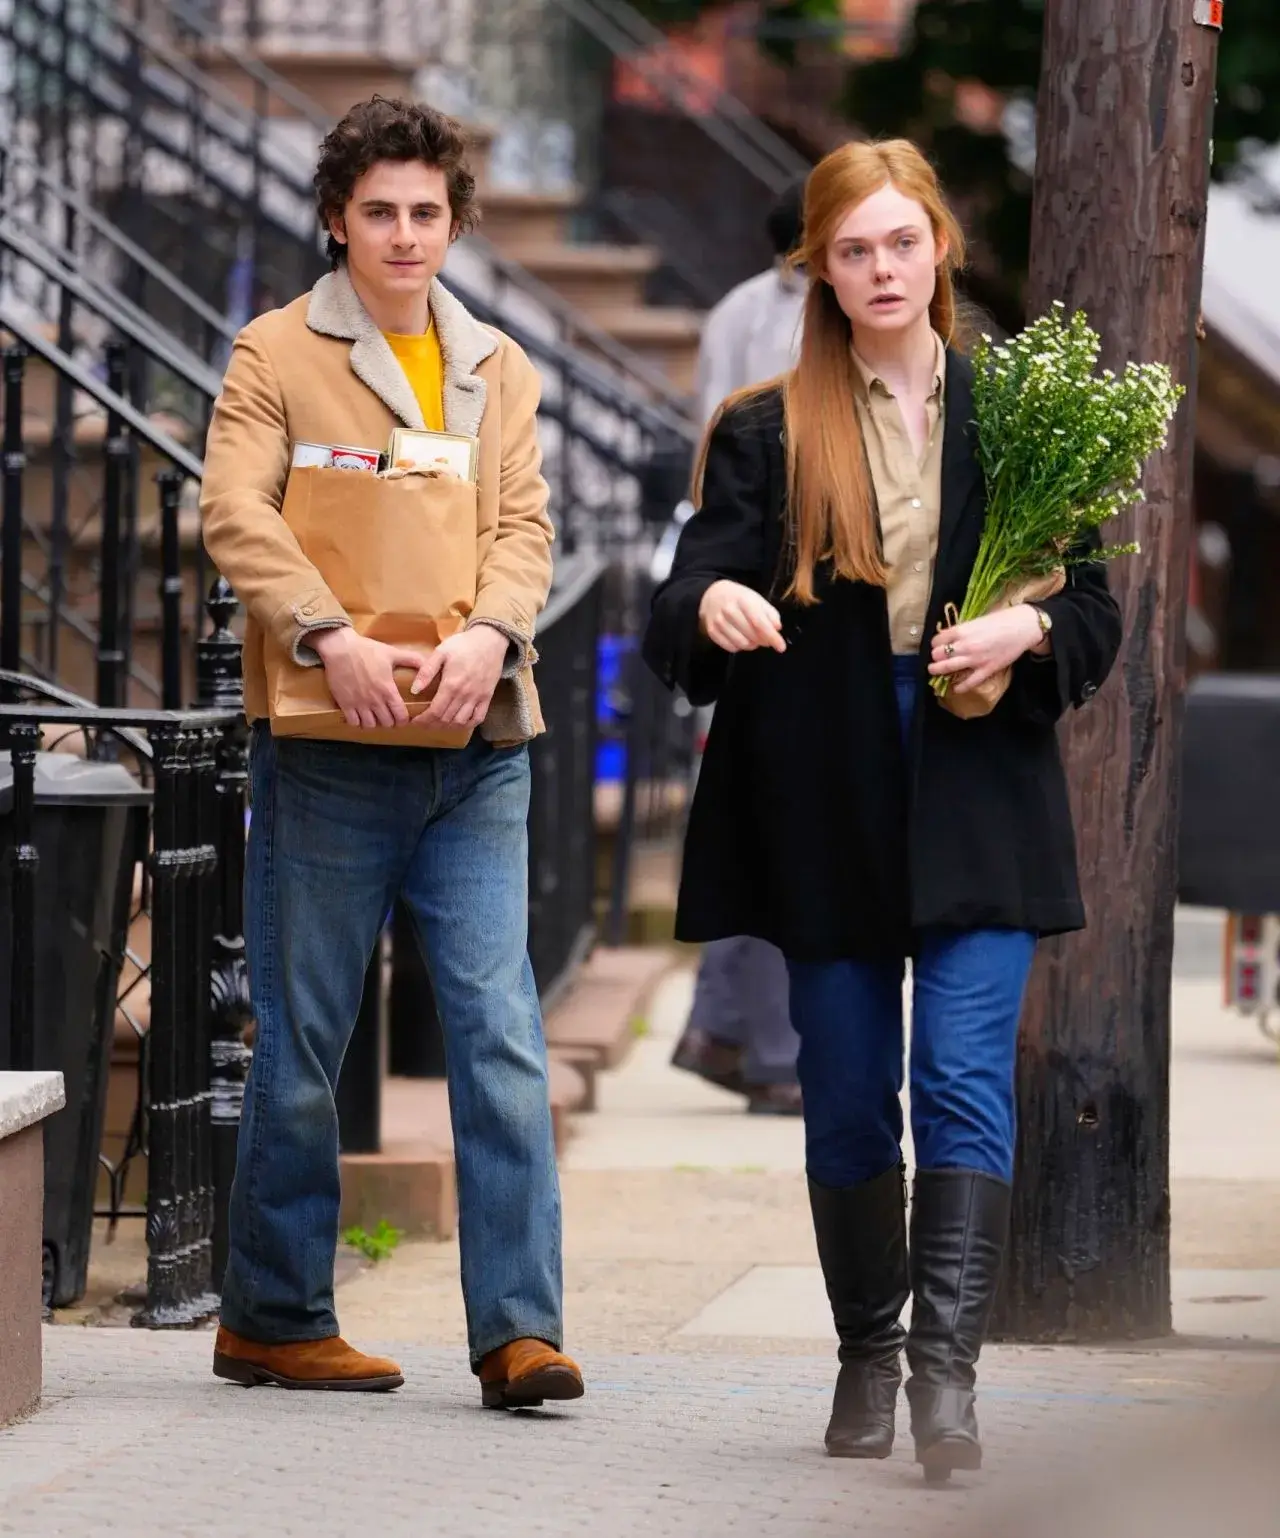 ELLE FANNING AND TIMOTHEE CHALAMET AT A COMPLETE UNKNOWN SET IN NEW JERSEY